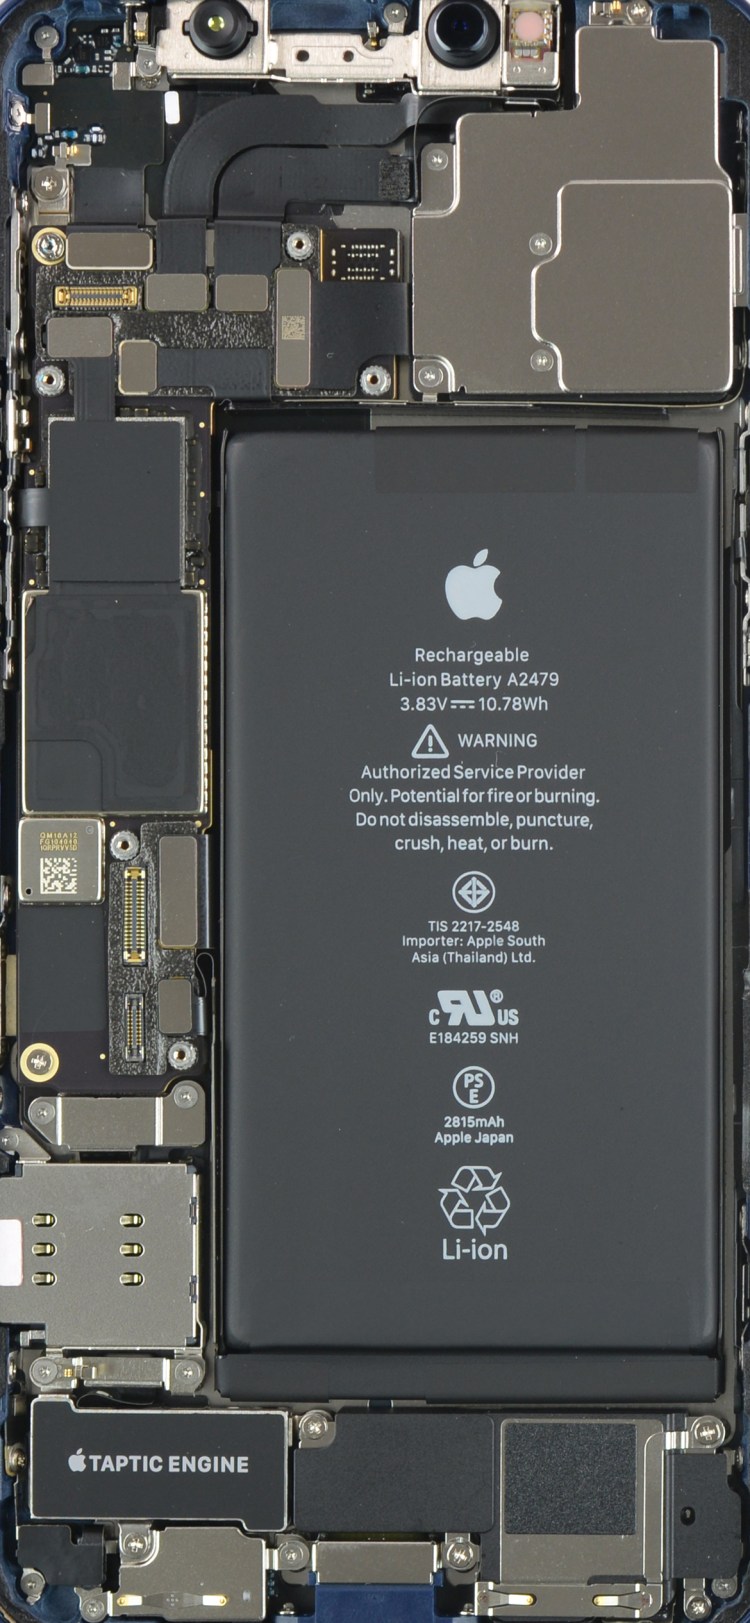 Get A Look Inside Your IPhone 12 With IFixit's New X Ray And Internal Wallpaper Tech News